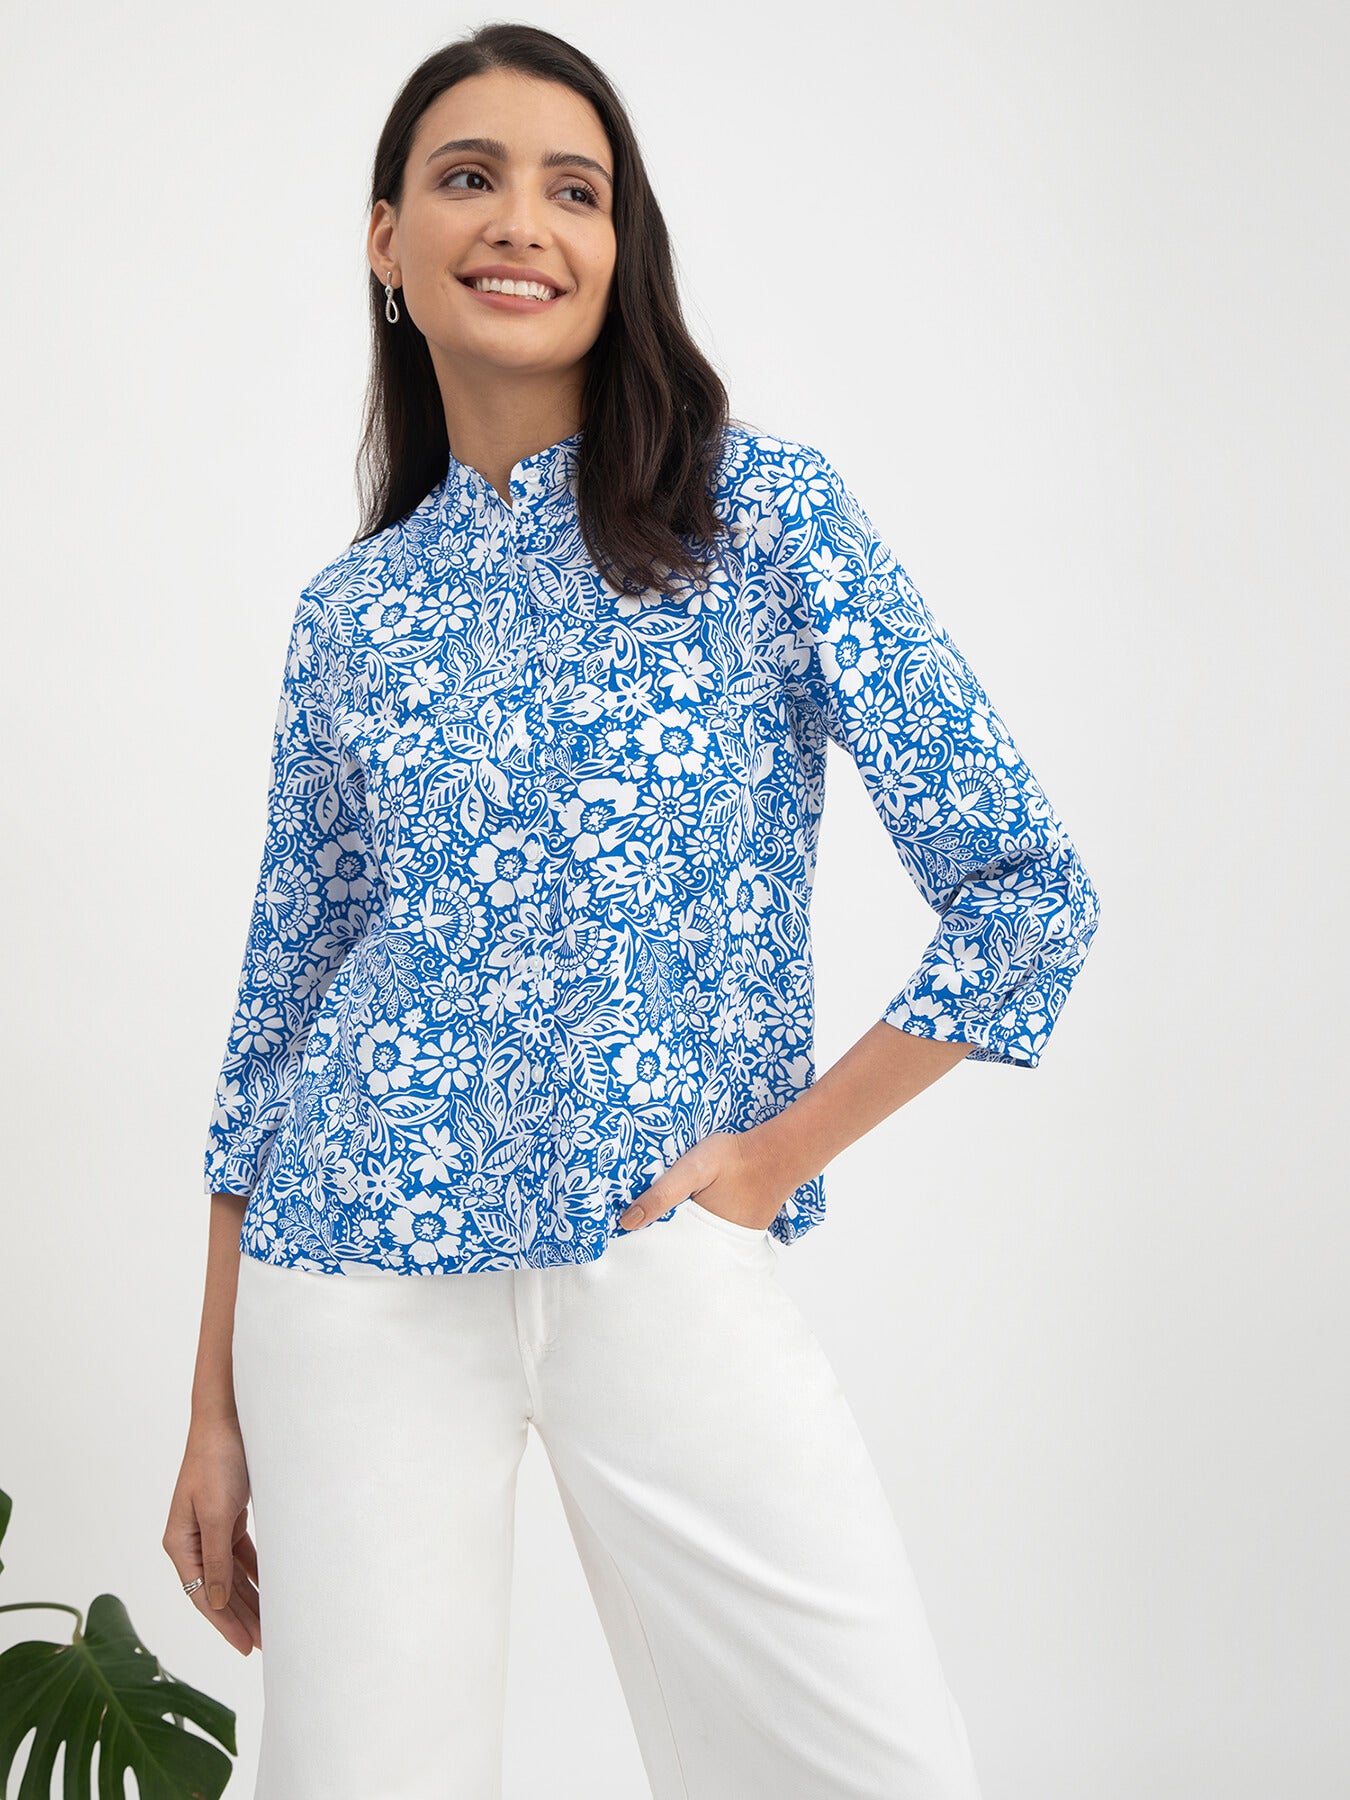 Floral Print Mandarin Neck Top - Blue And White